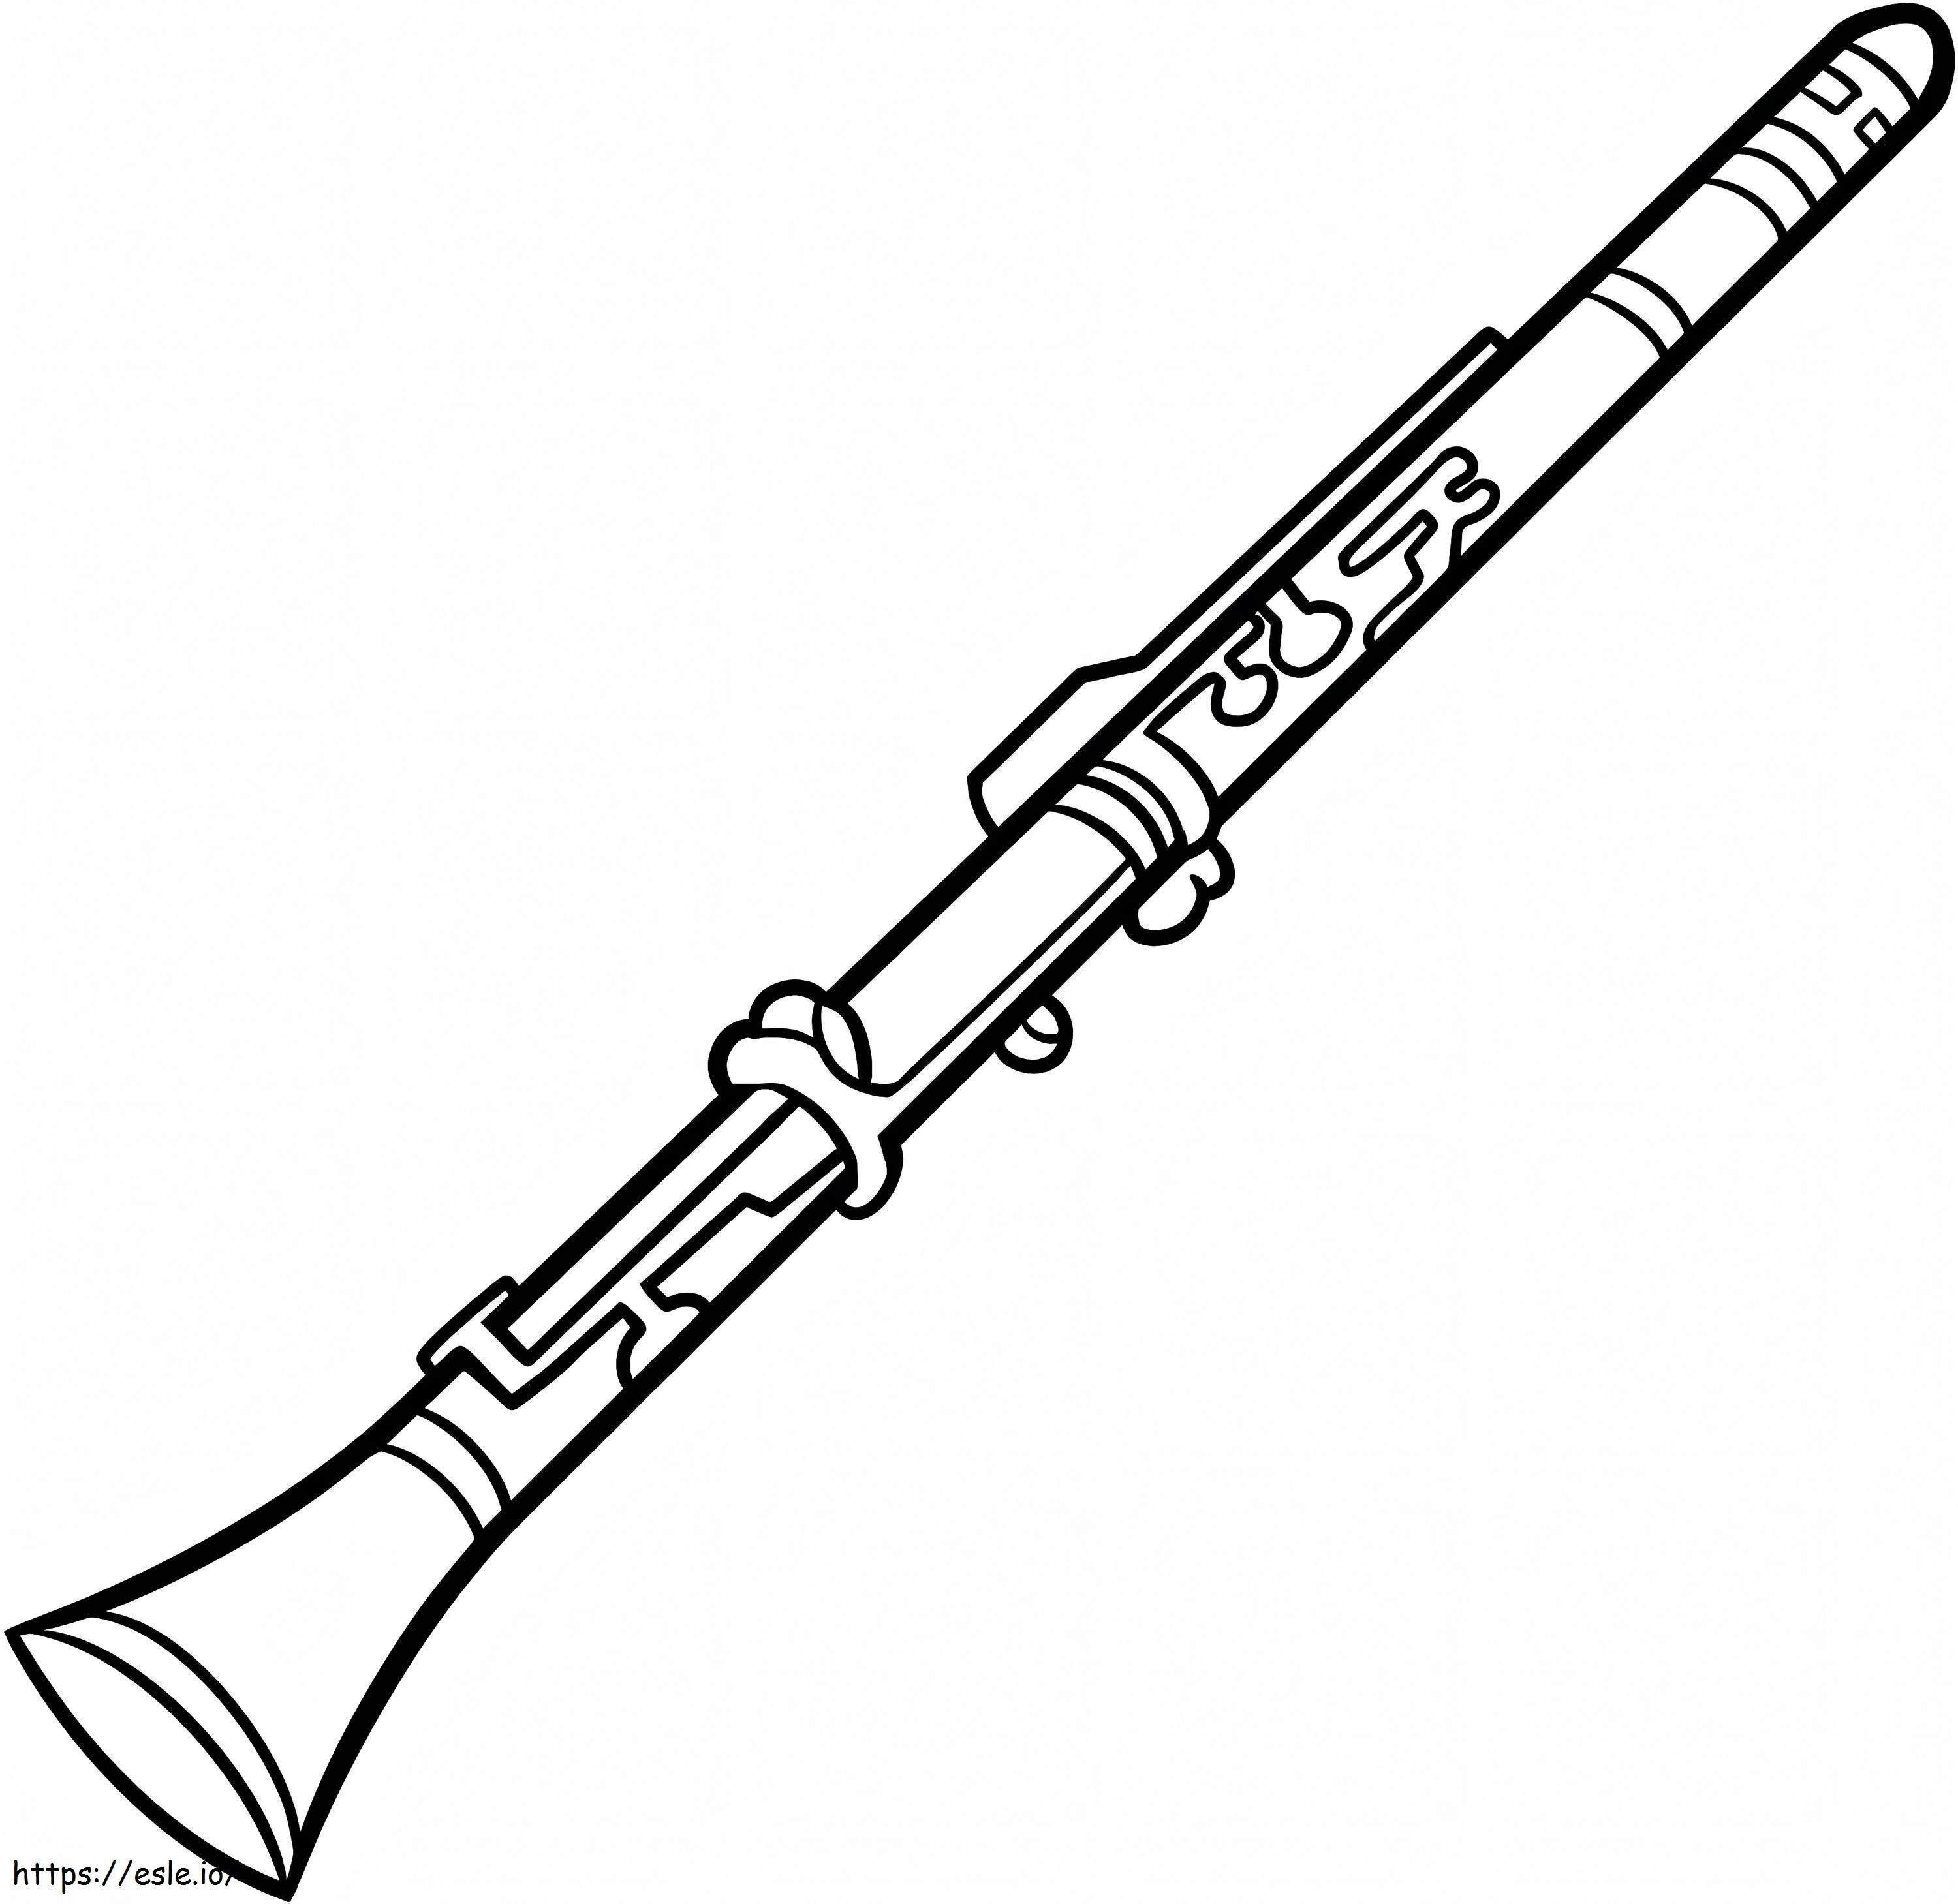 A Clarinet coloring page